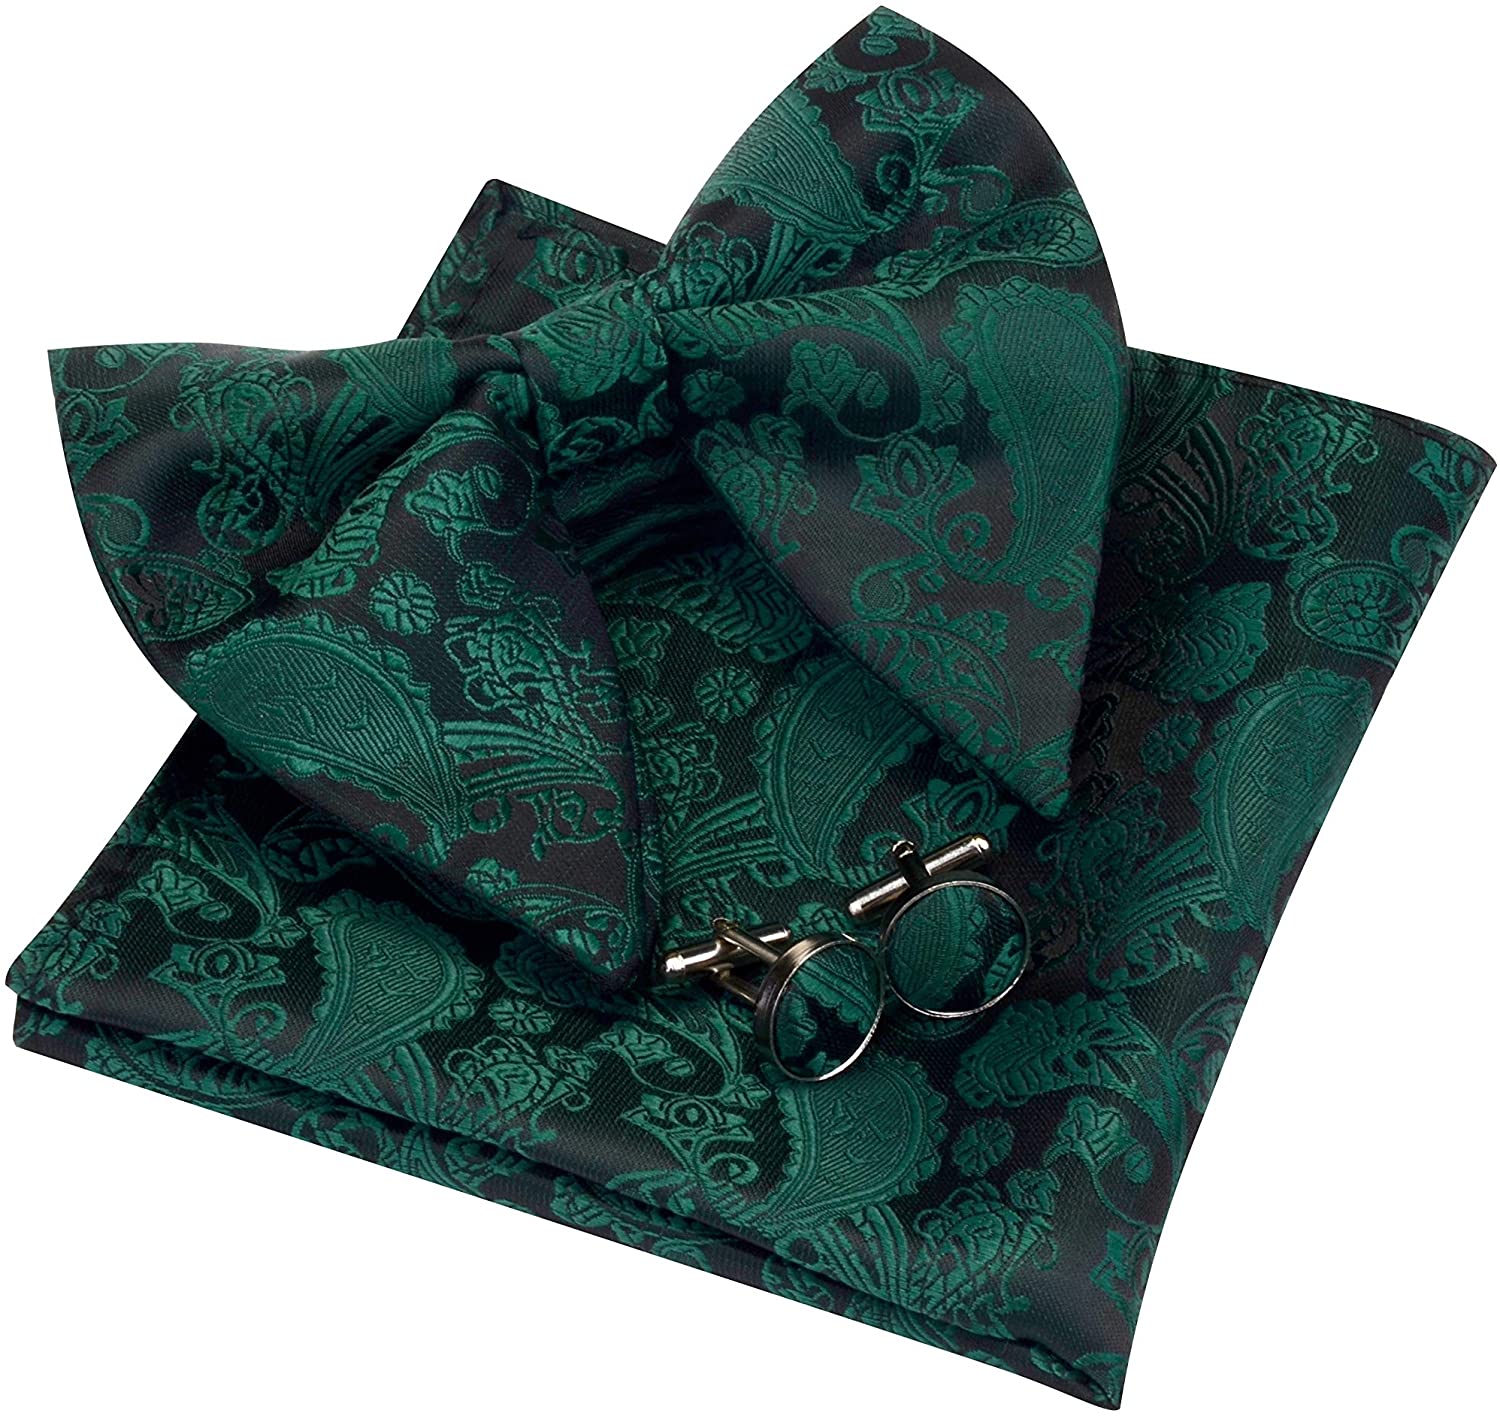 Details about   GUSLESON Fashion New Paisley Adjustable Pre-tied Big Bow Tie and Pocket Square C